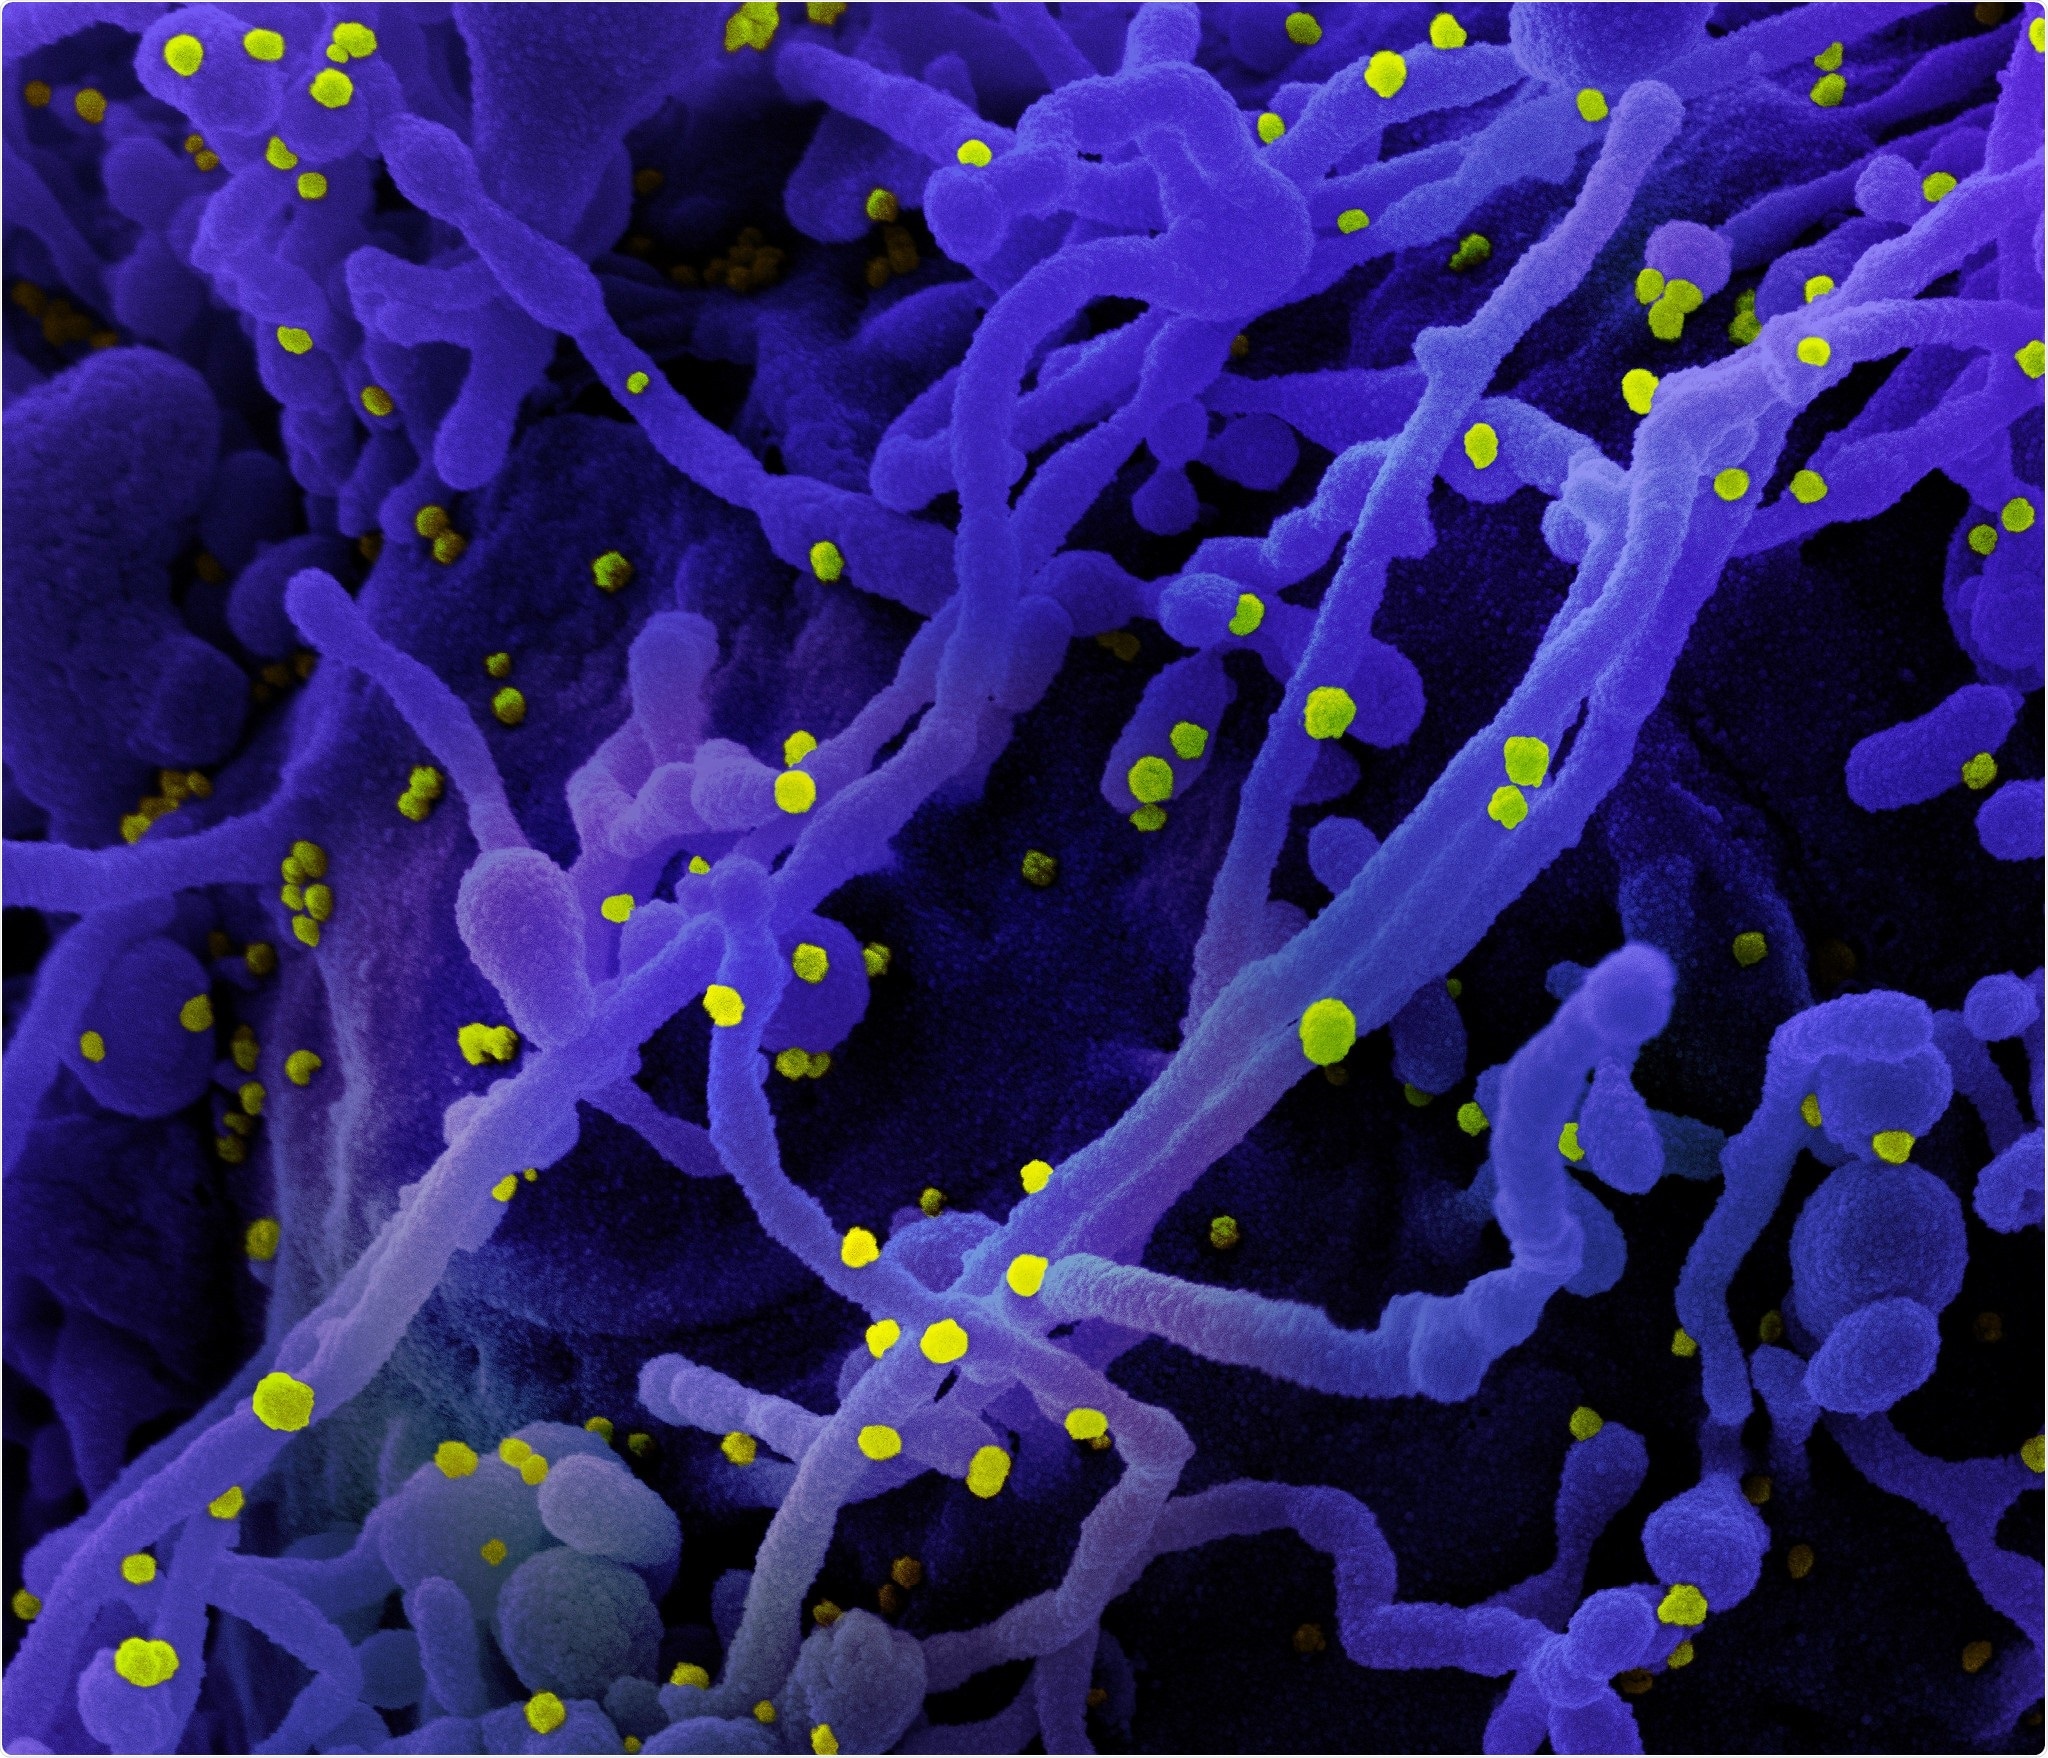 Colorized scanning electron micrograph of a cell (purple) infected with SARS-CoV-2 virus particles (yellow), isolated from a patient sample. Image captured at the NIAID Integrated Research Facility (IRF) in Fort Detrick, Maryland. Credit: NIAID